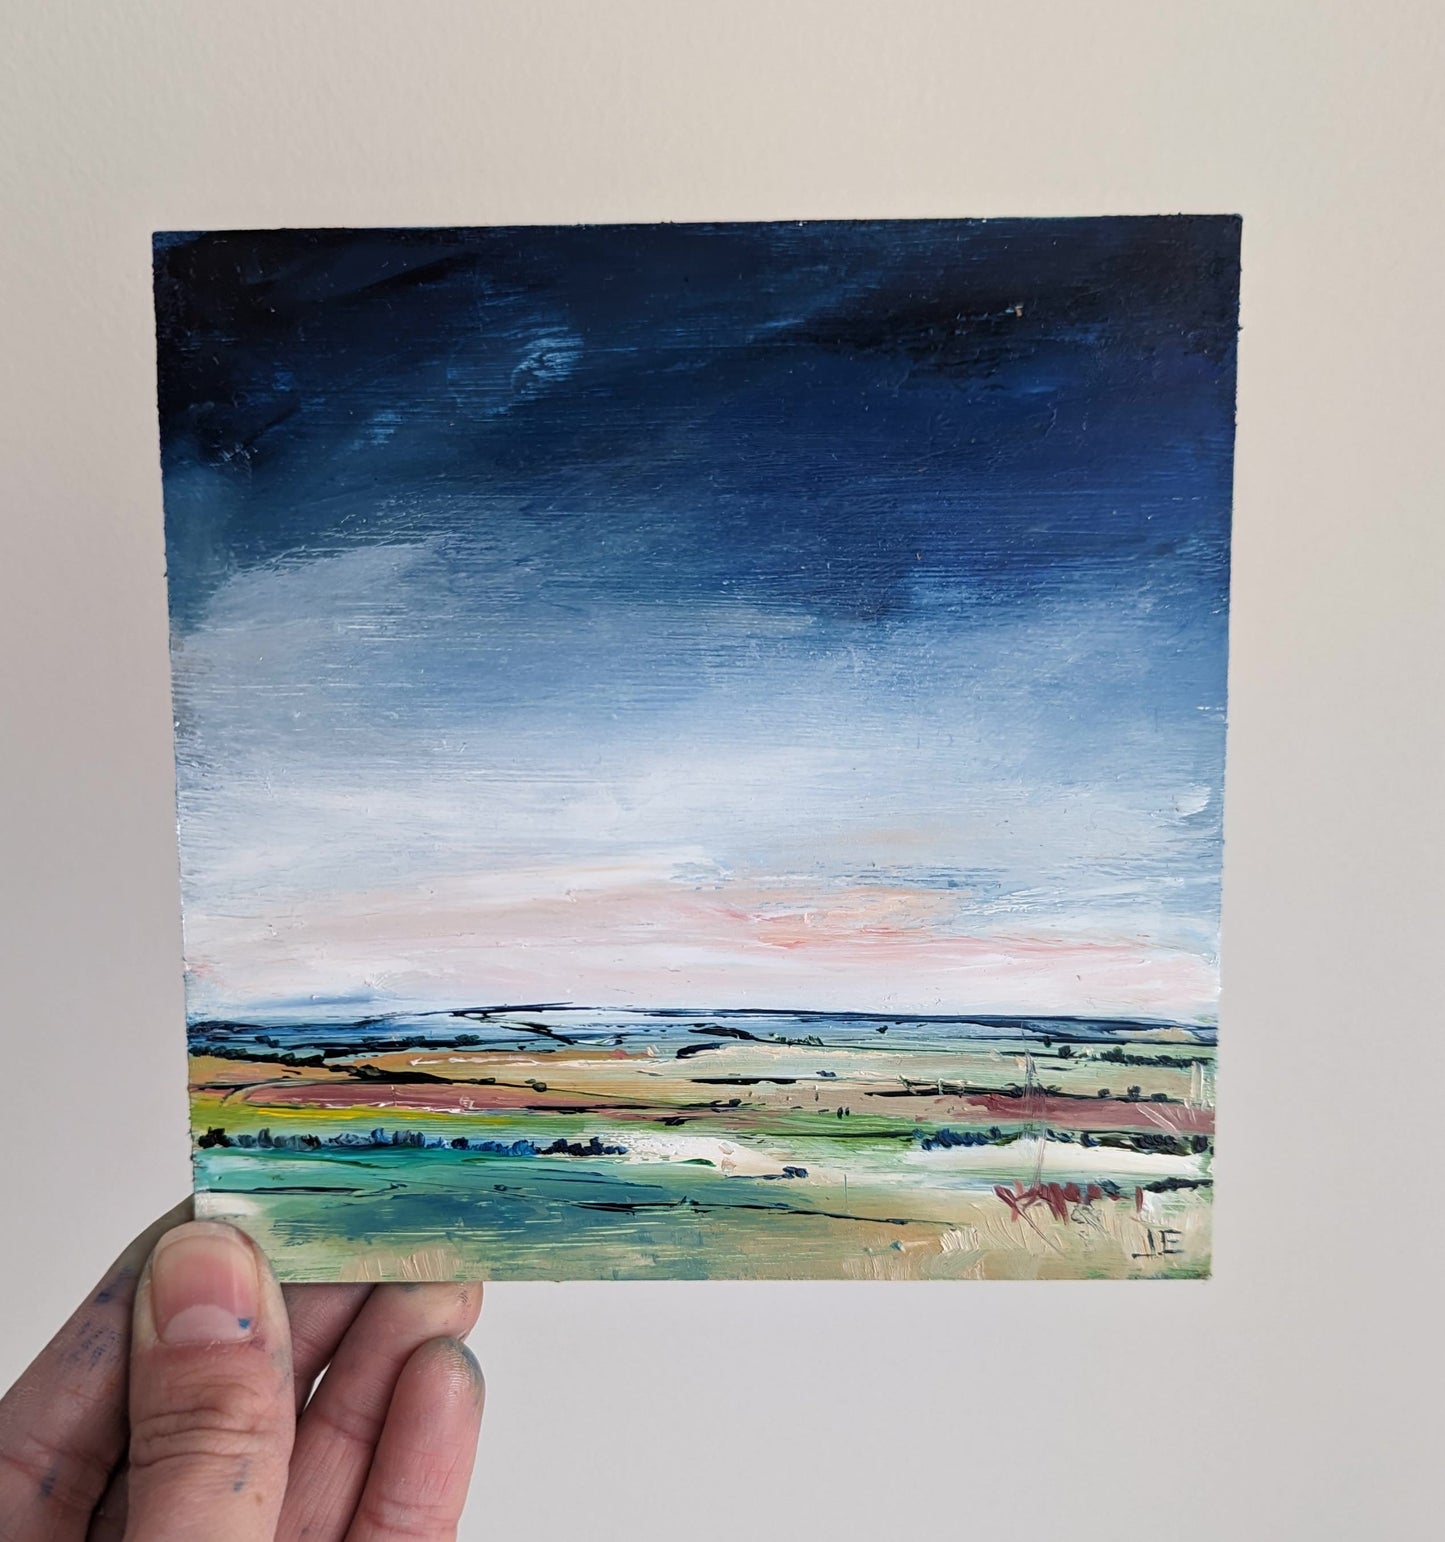 Miniature Abstract Chilterns Landscape #15